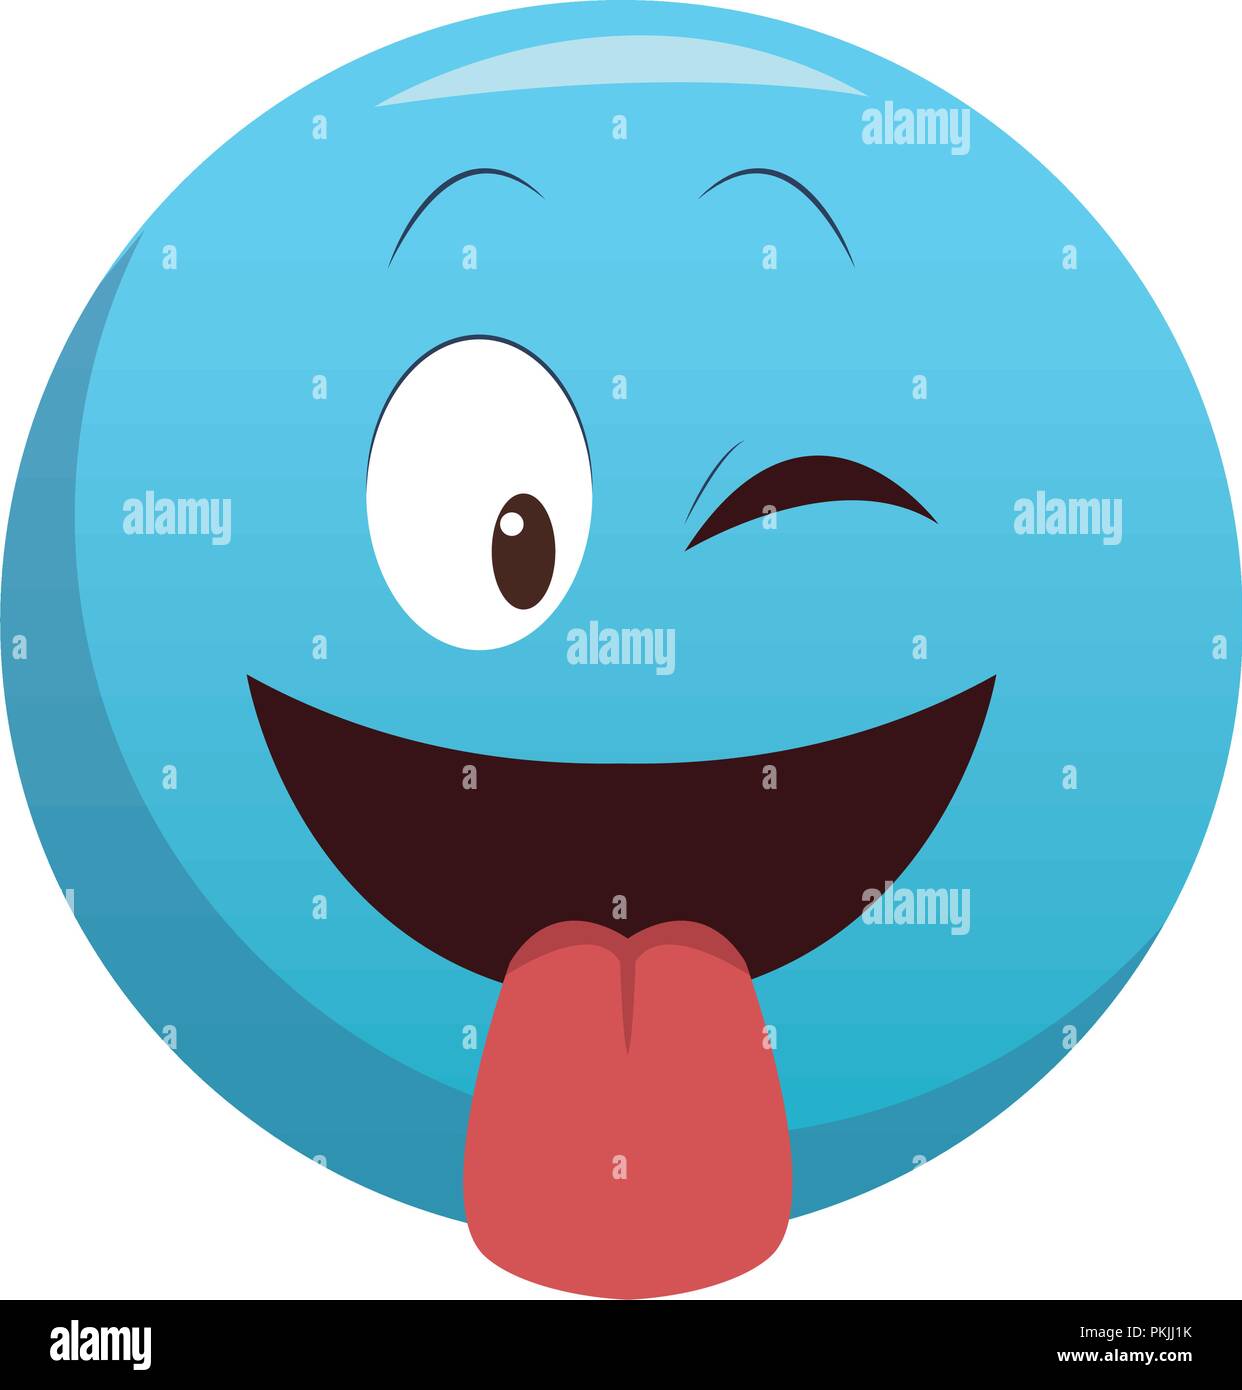 Tongue out chat emoticon Stock Vector